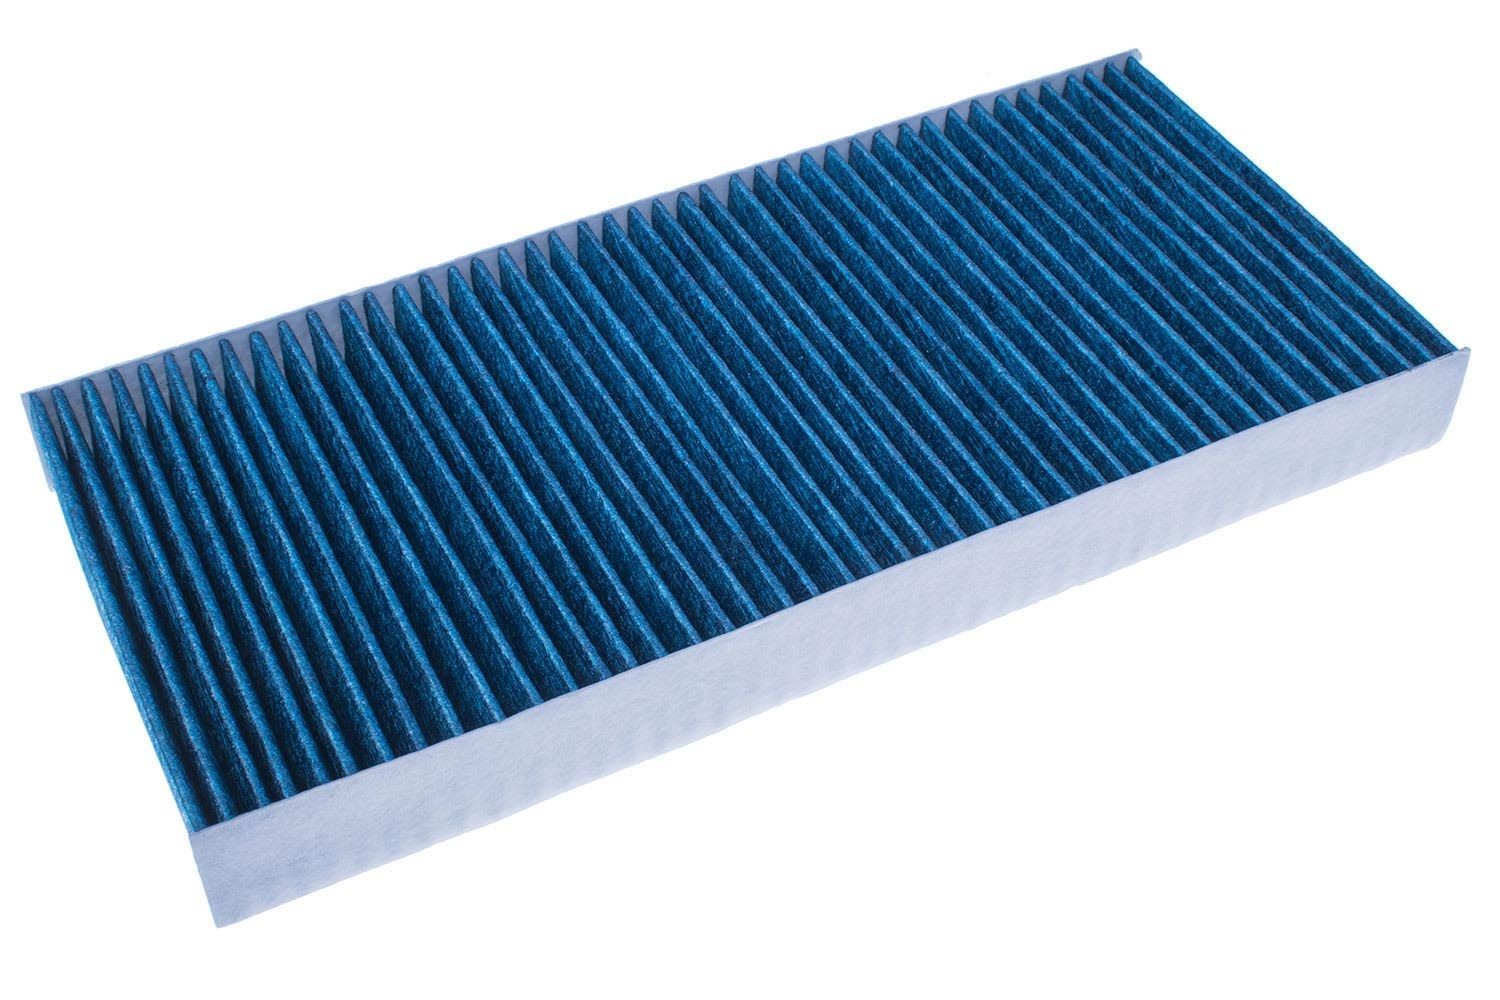 DENCKERMANN Activated Carbon Filter, 397 mm x 180 mm x 40 mm Width: 180mm, Height: 40mm, Length: 397mm Cabin filter M119015A buy